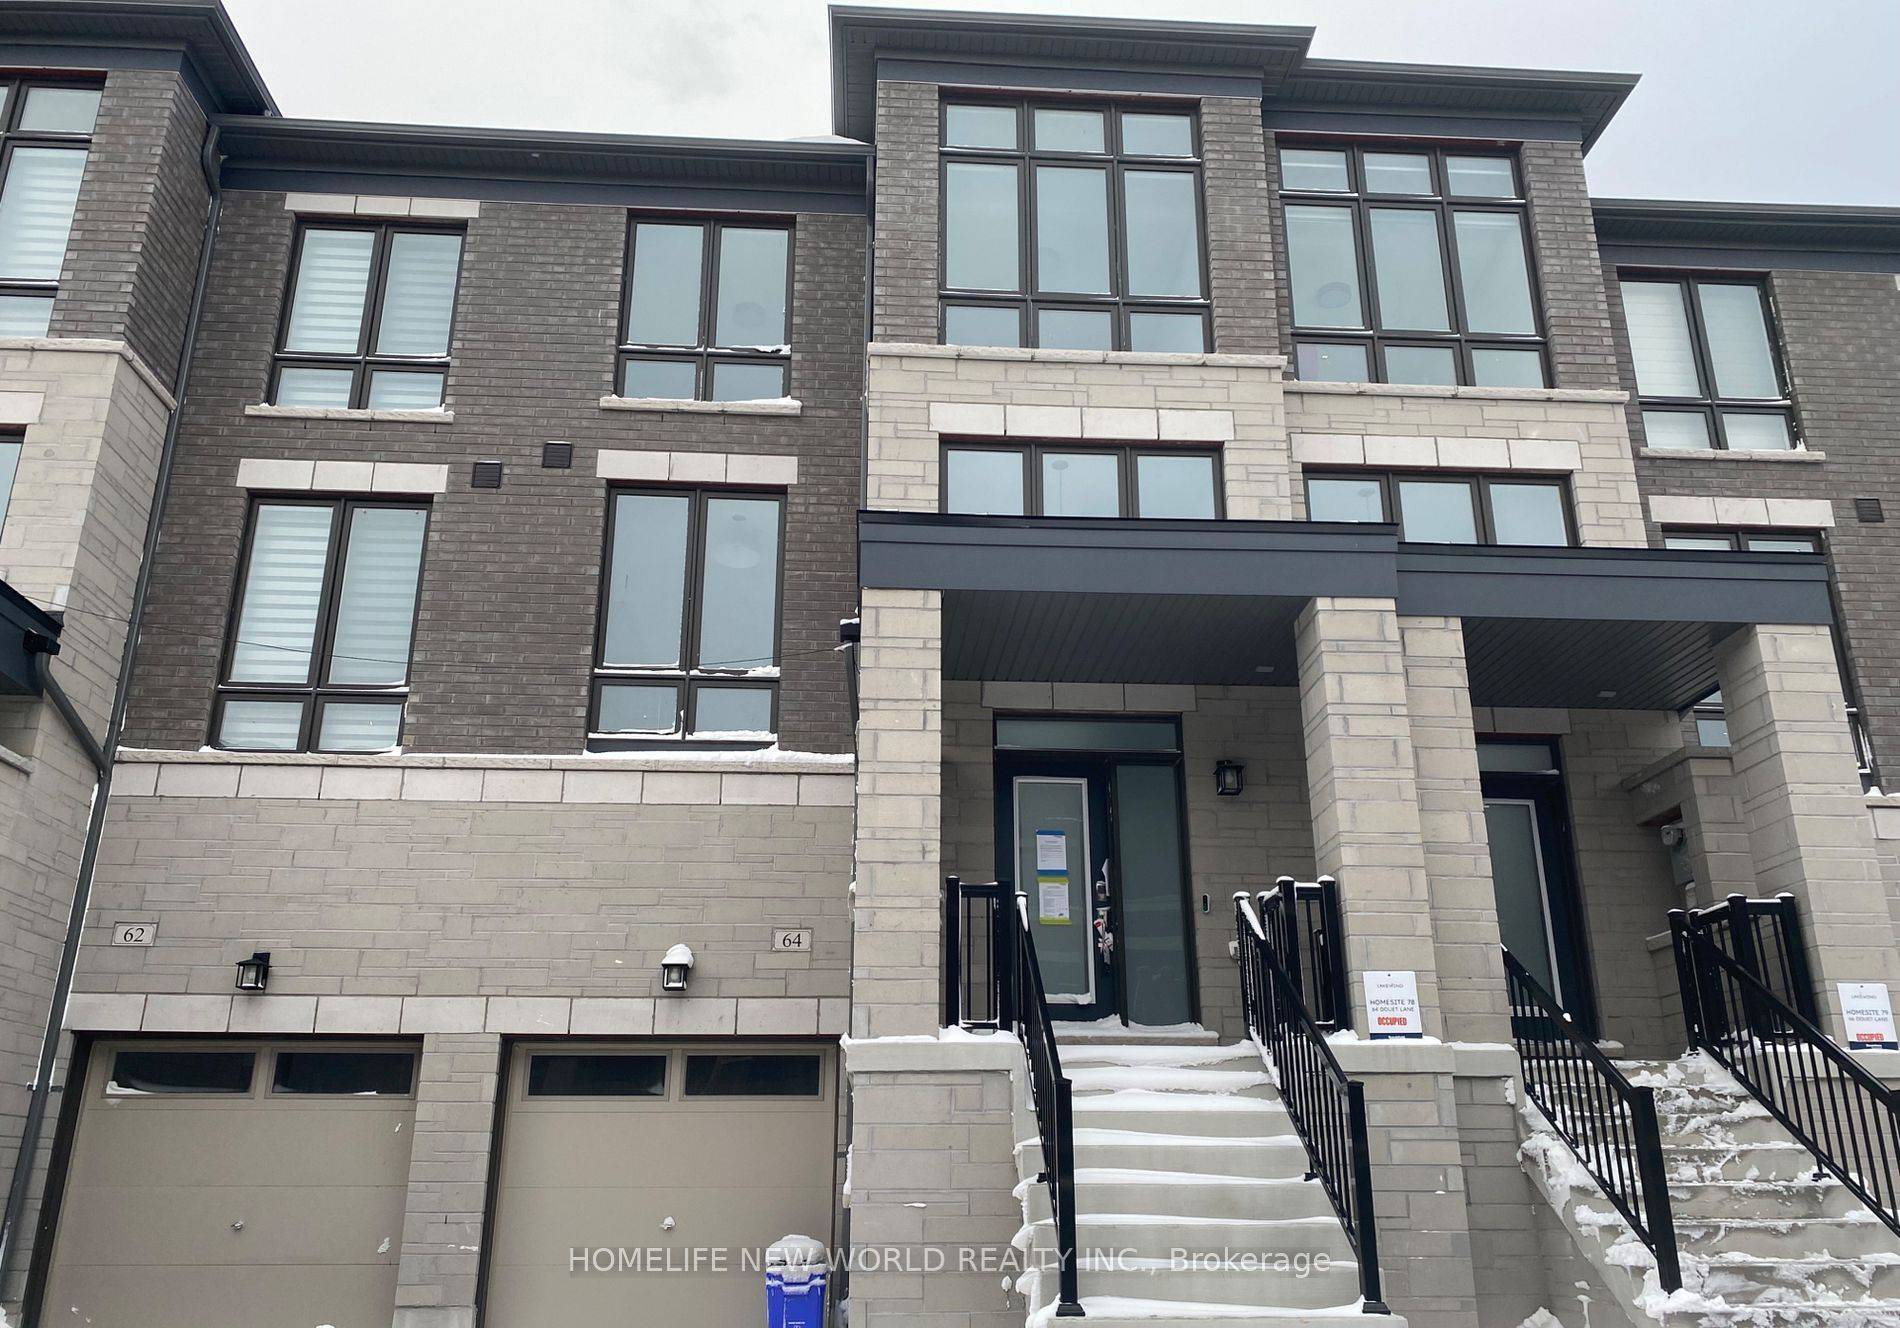 This newly constructed townhouse, developed by Brookfield Residential in the Lakewind Community, boasts a modern upgrade to a four bedroom layout, complete with two master ensuites.